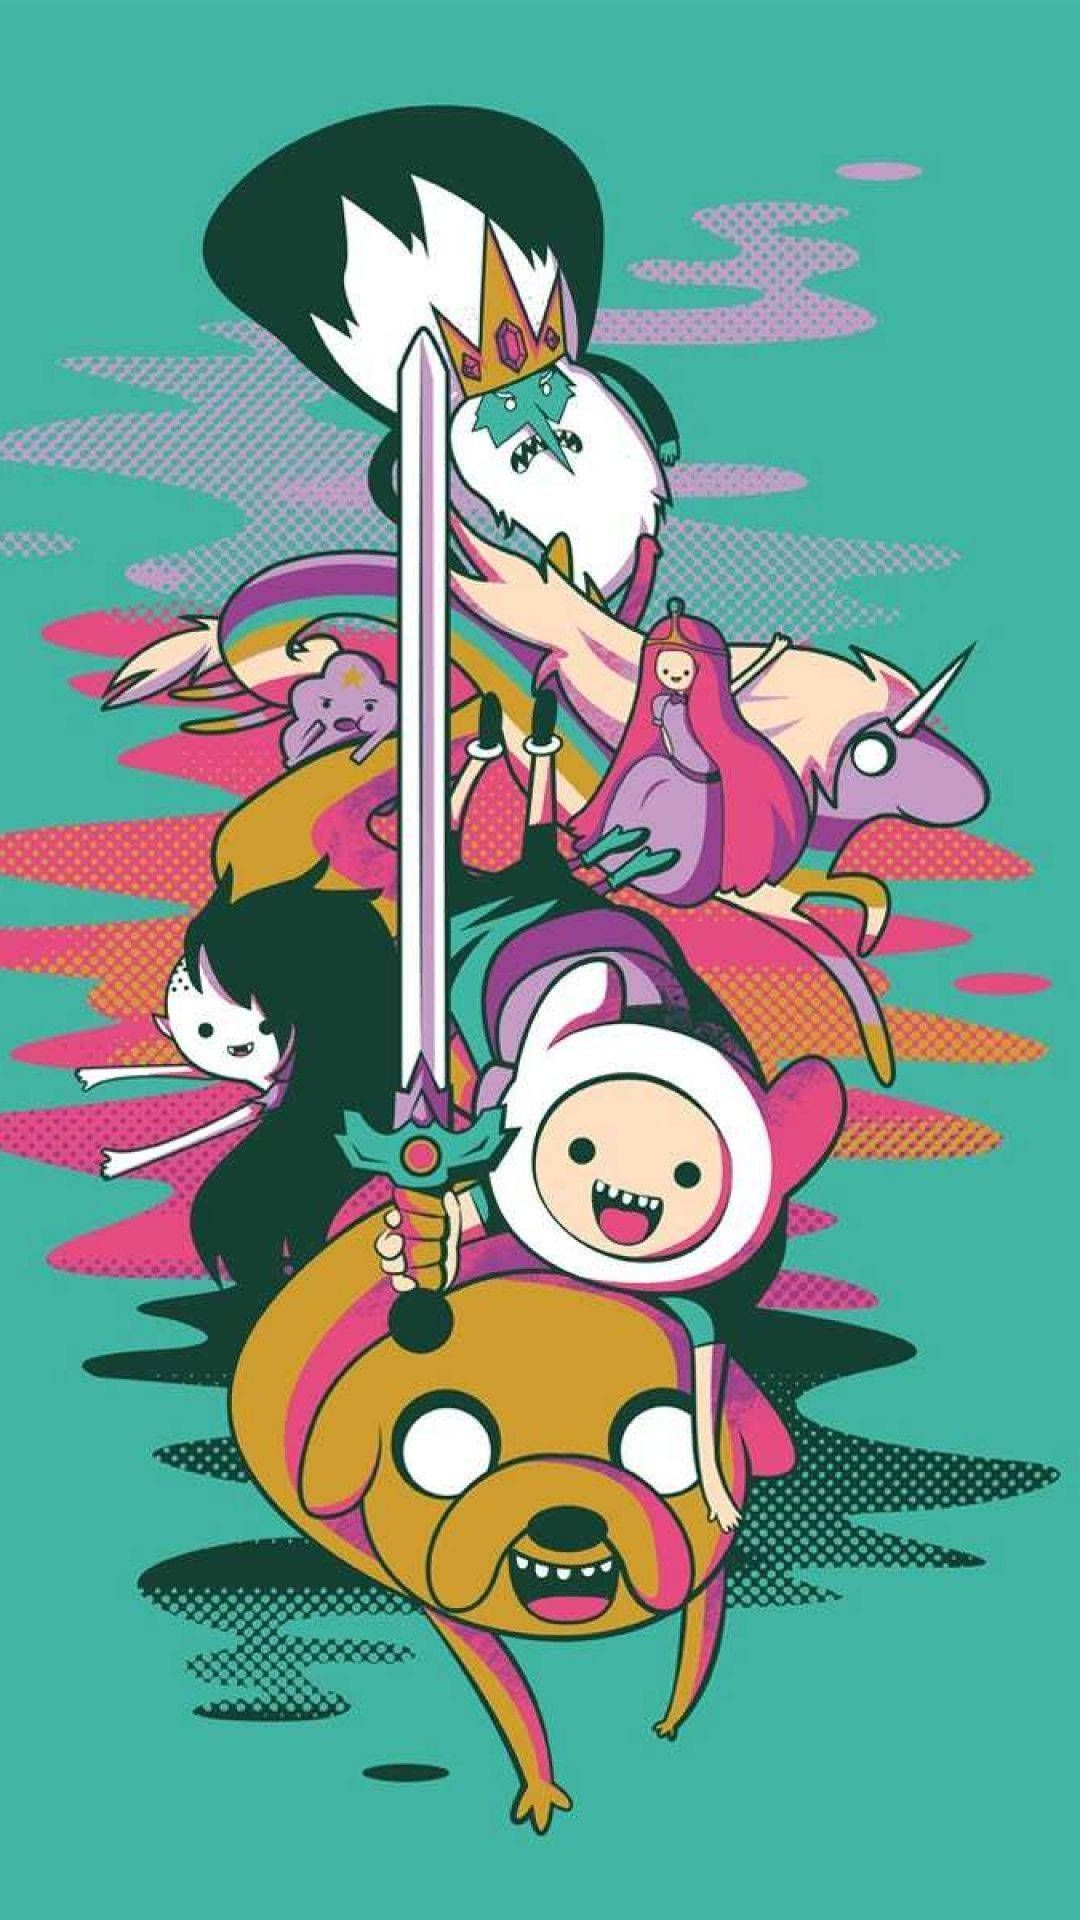 Adventure Time Wallpaper for iPhone with high-resolution 1080x1920 pixel. You can use this wallpaper for your iPhone 5, 6, 7, 8, X, XS, XR backgrounds, Mobile Screensaver, or iPad Lock Screen - Adventure Time